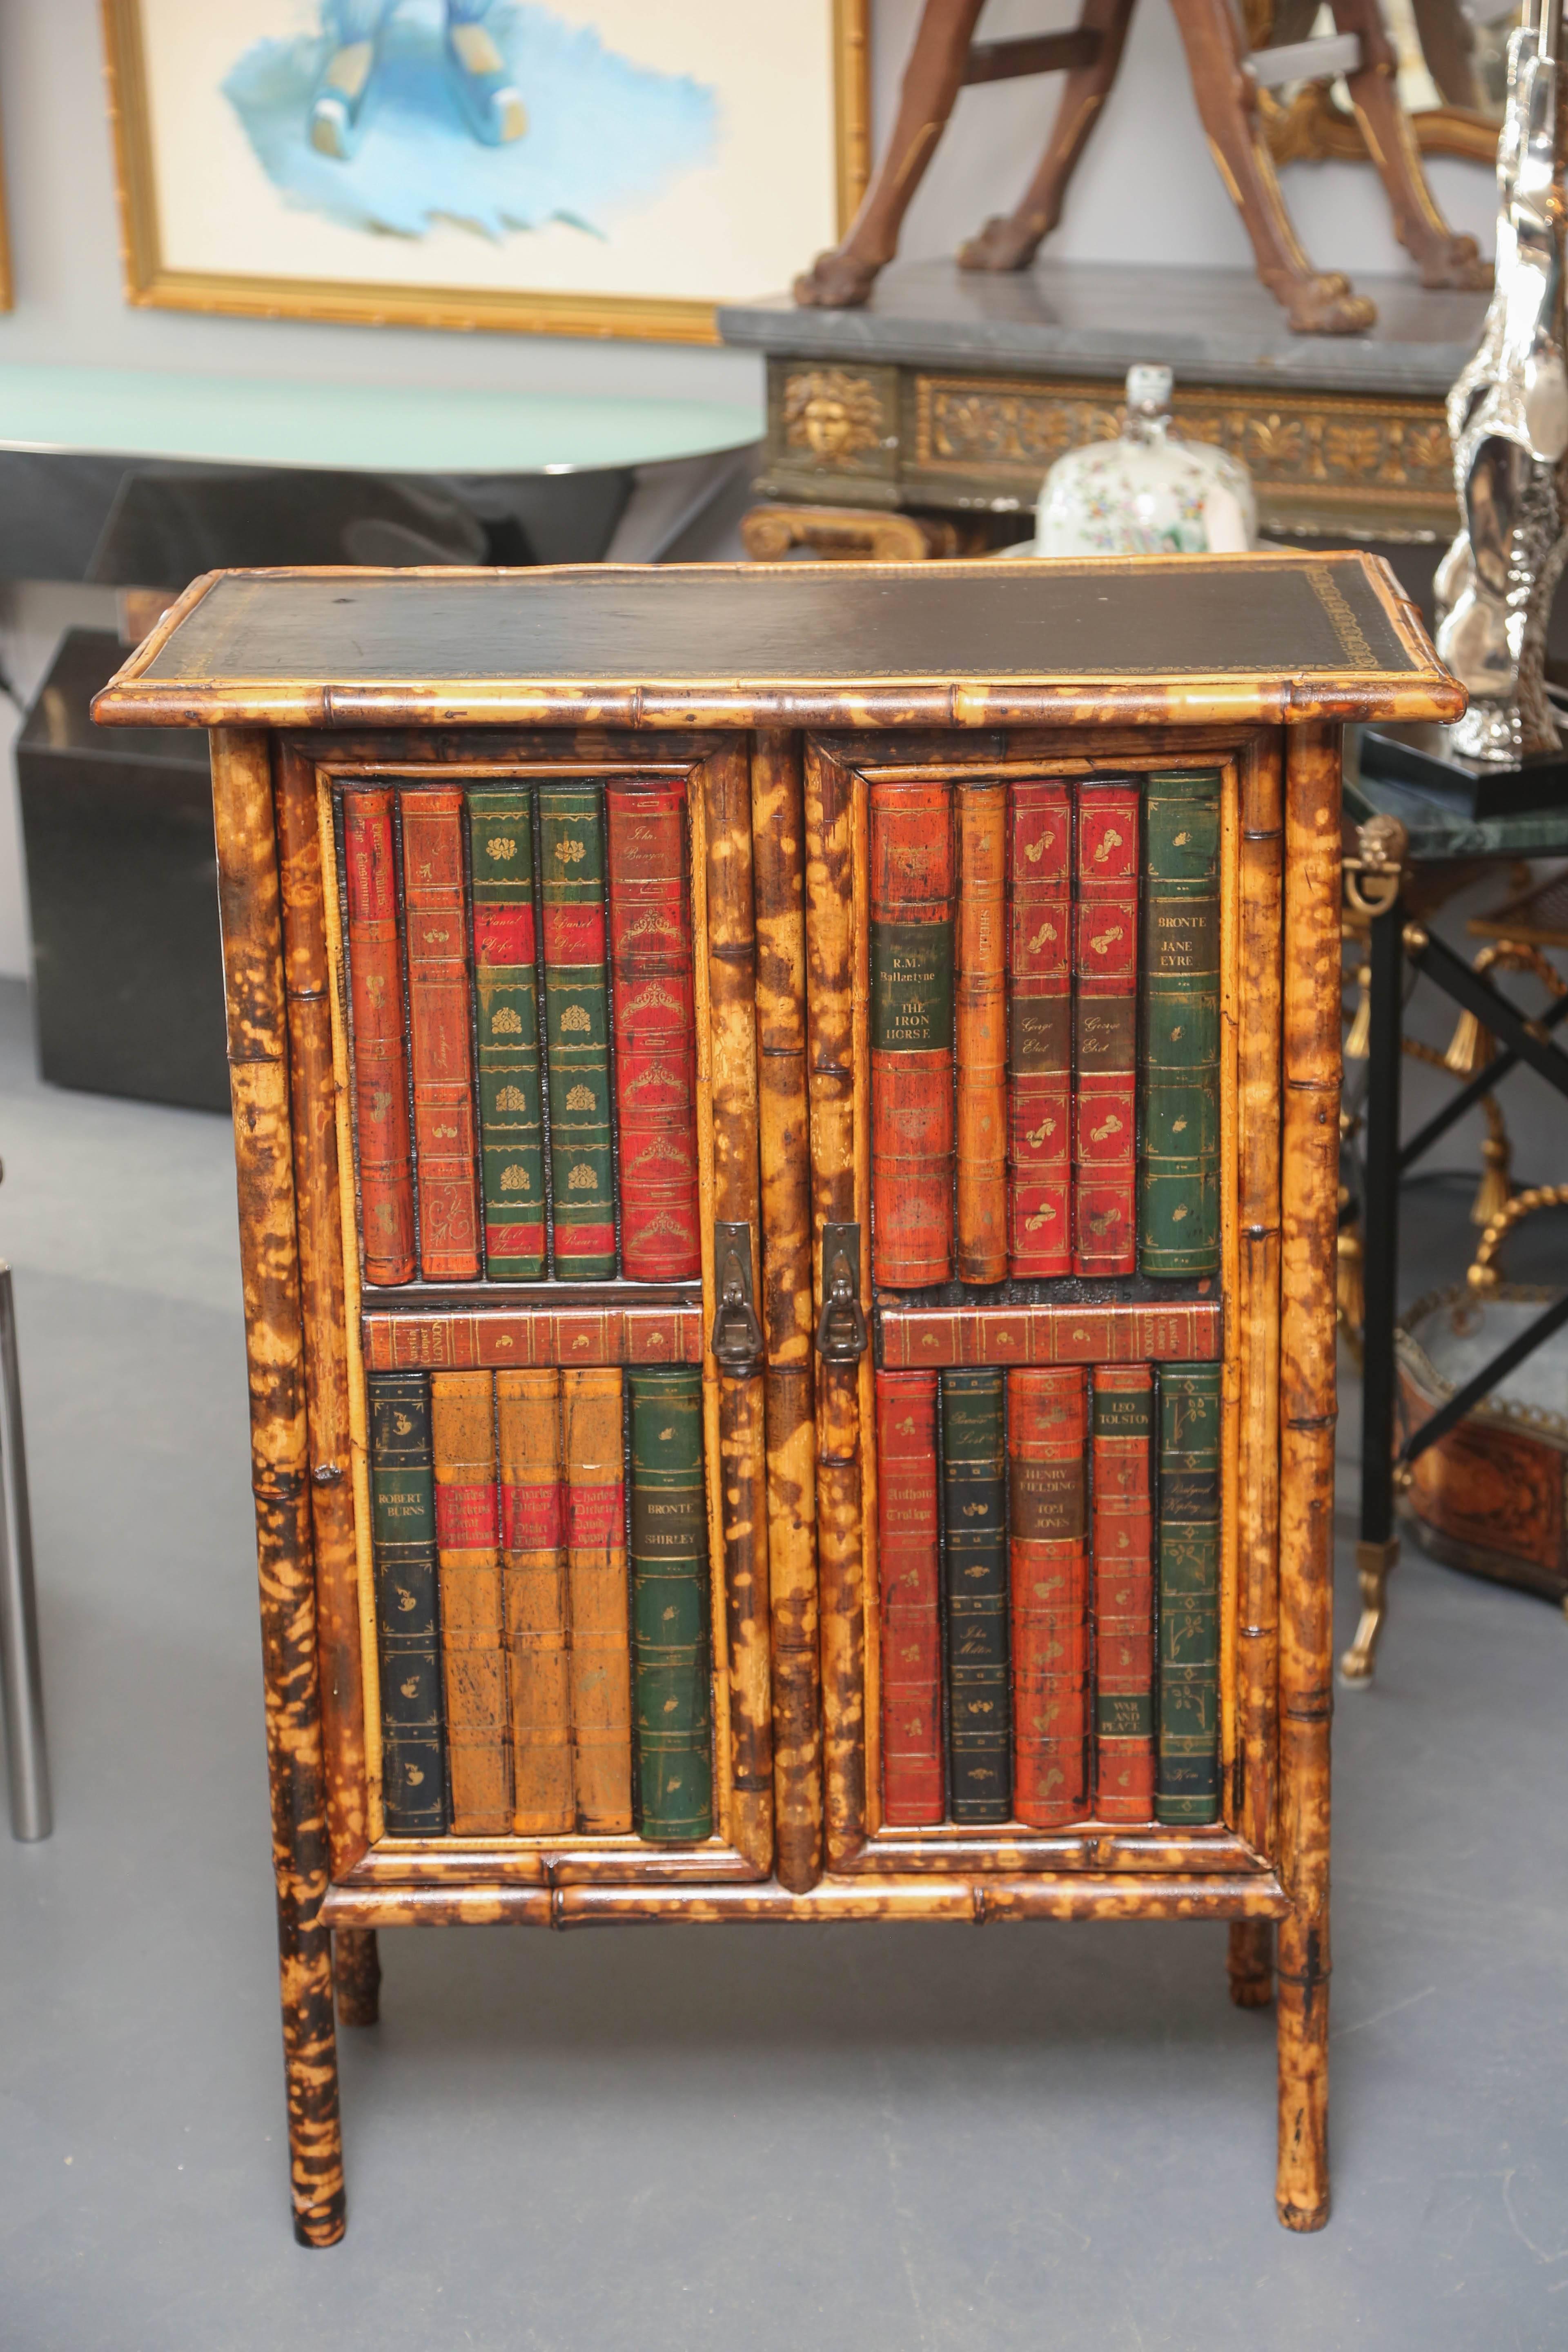 Beautifully detailed with a leather top and leather "book binding" front, nicely finished interior.